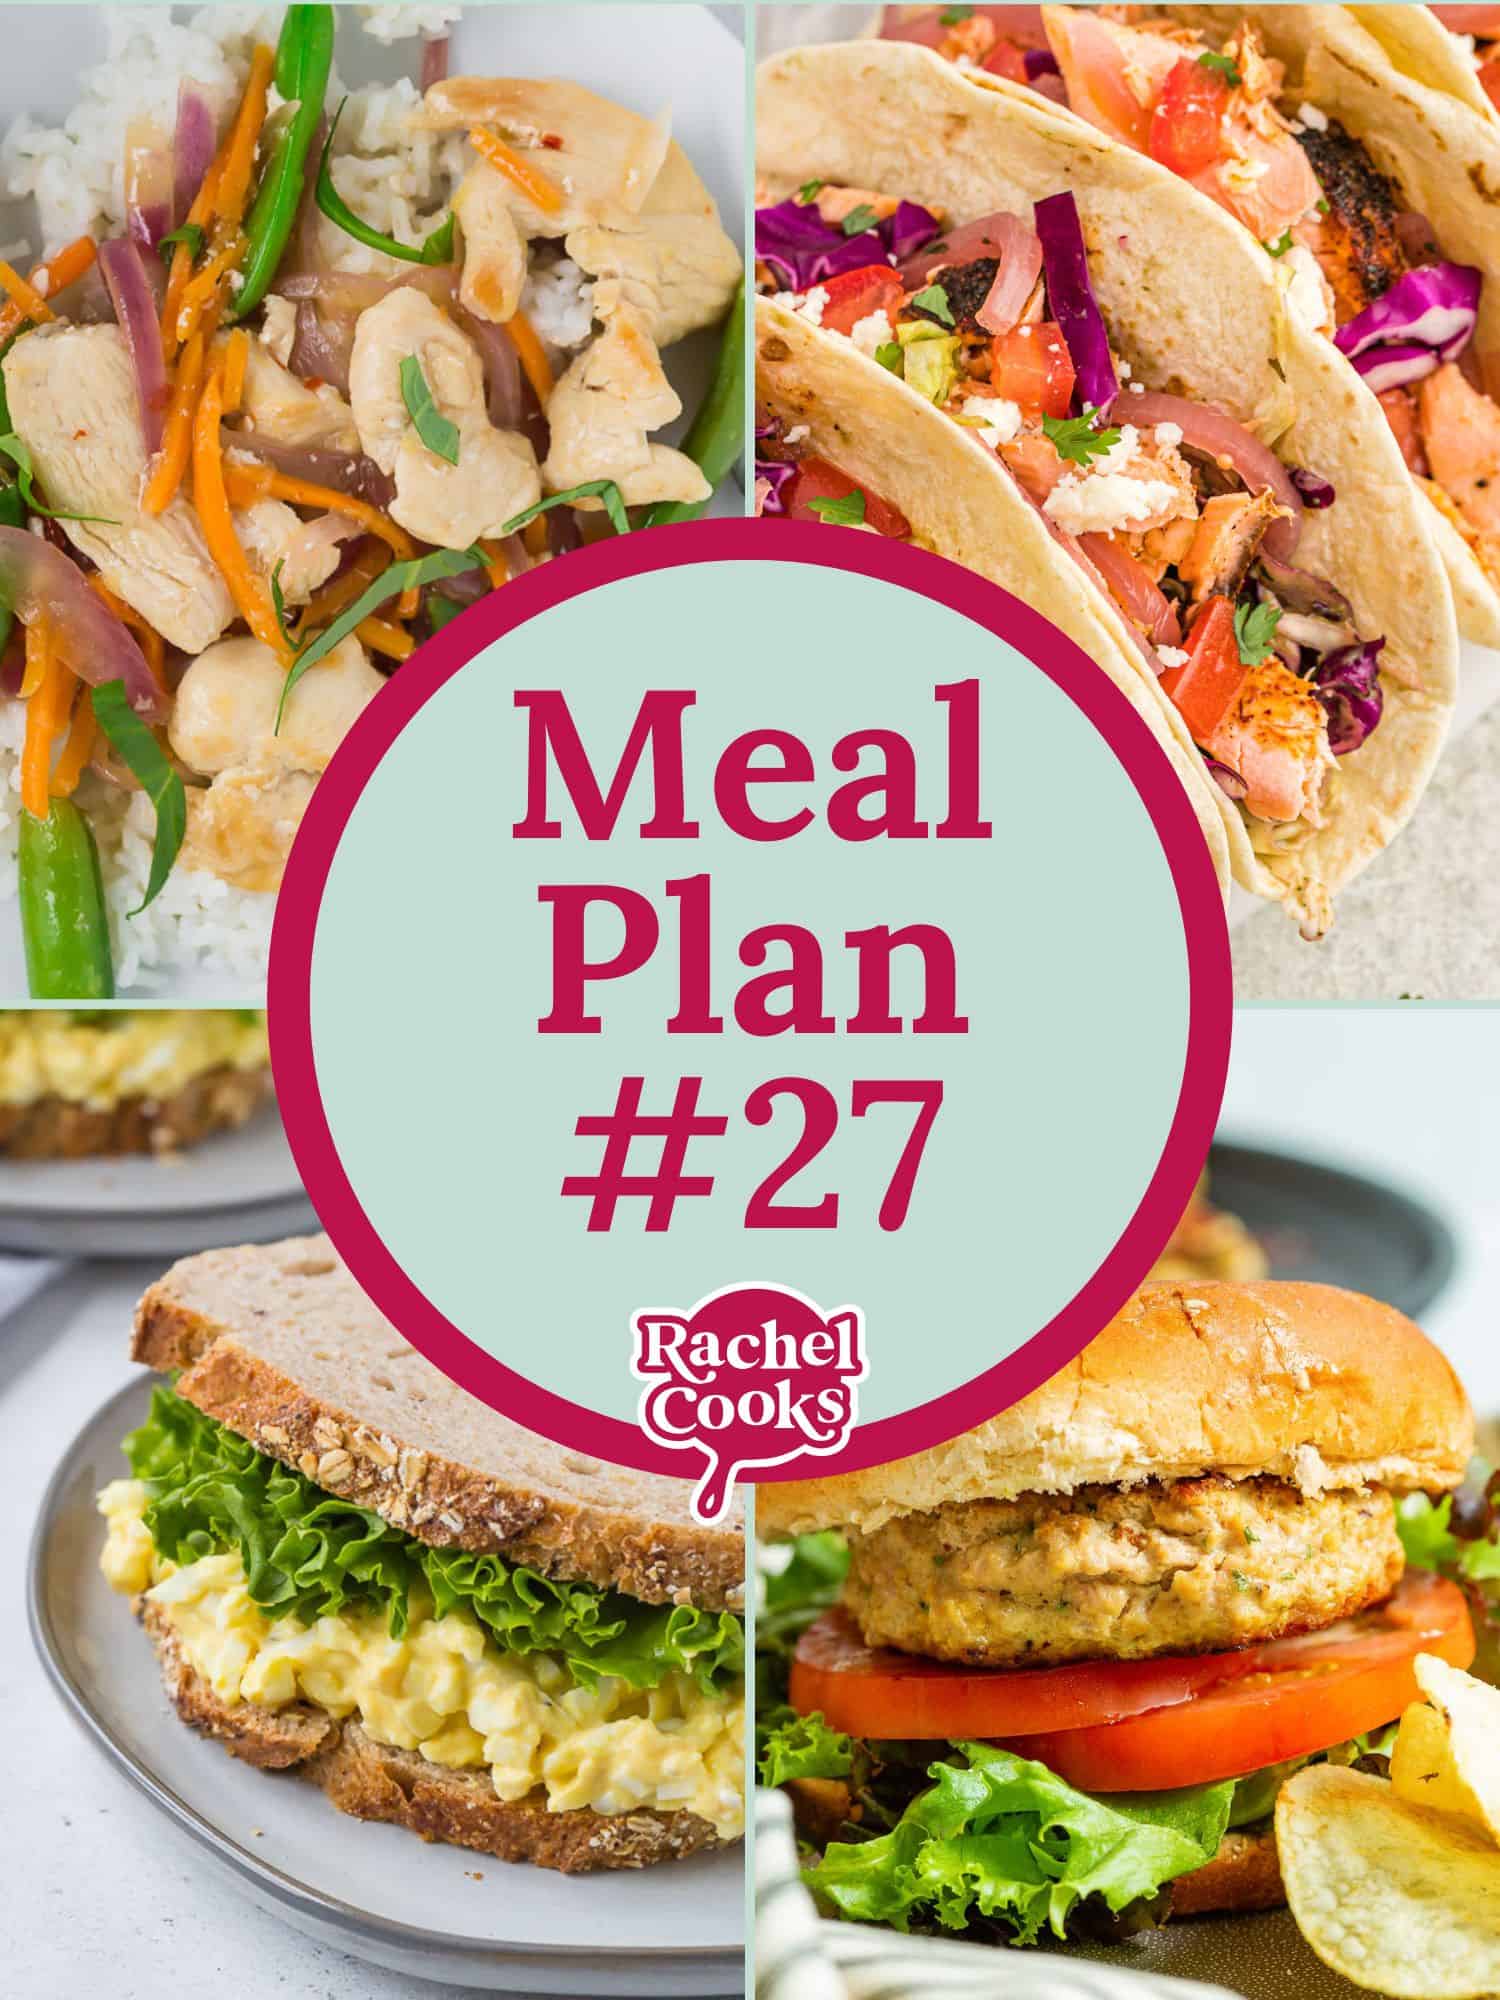 Meal plan 27 graphic with text and overlay.